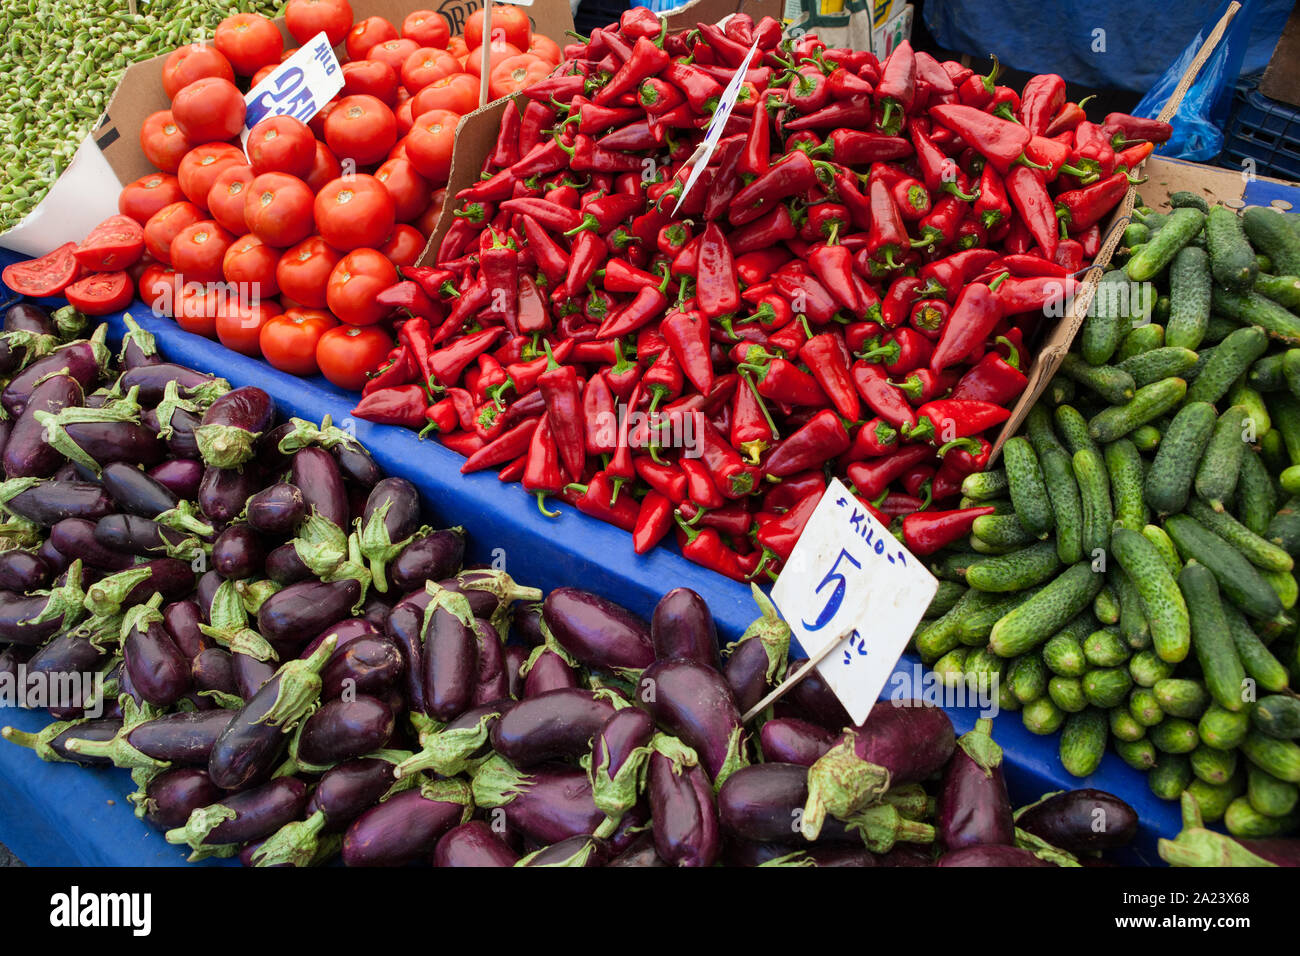 Market stall selling vegetables in the Fatih district of Istanbul Stock Photo